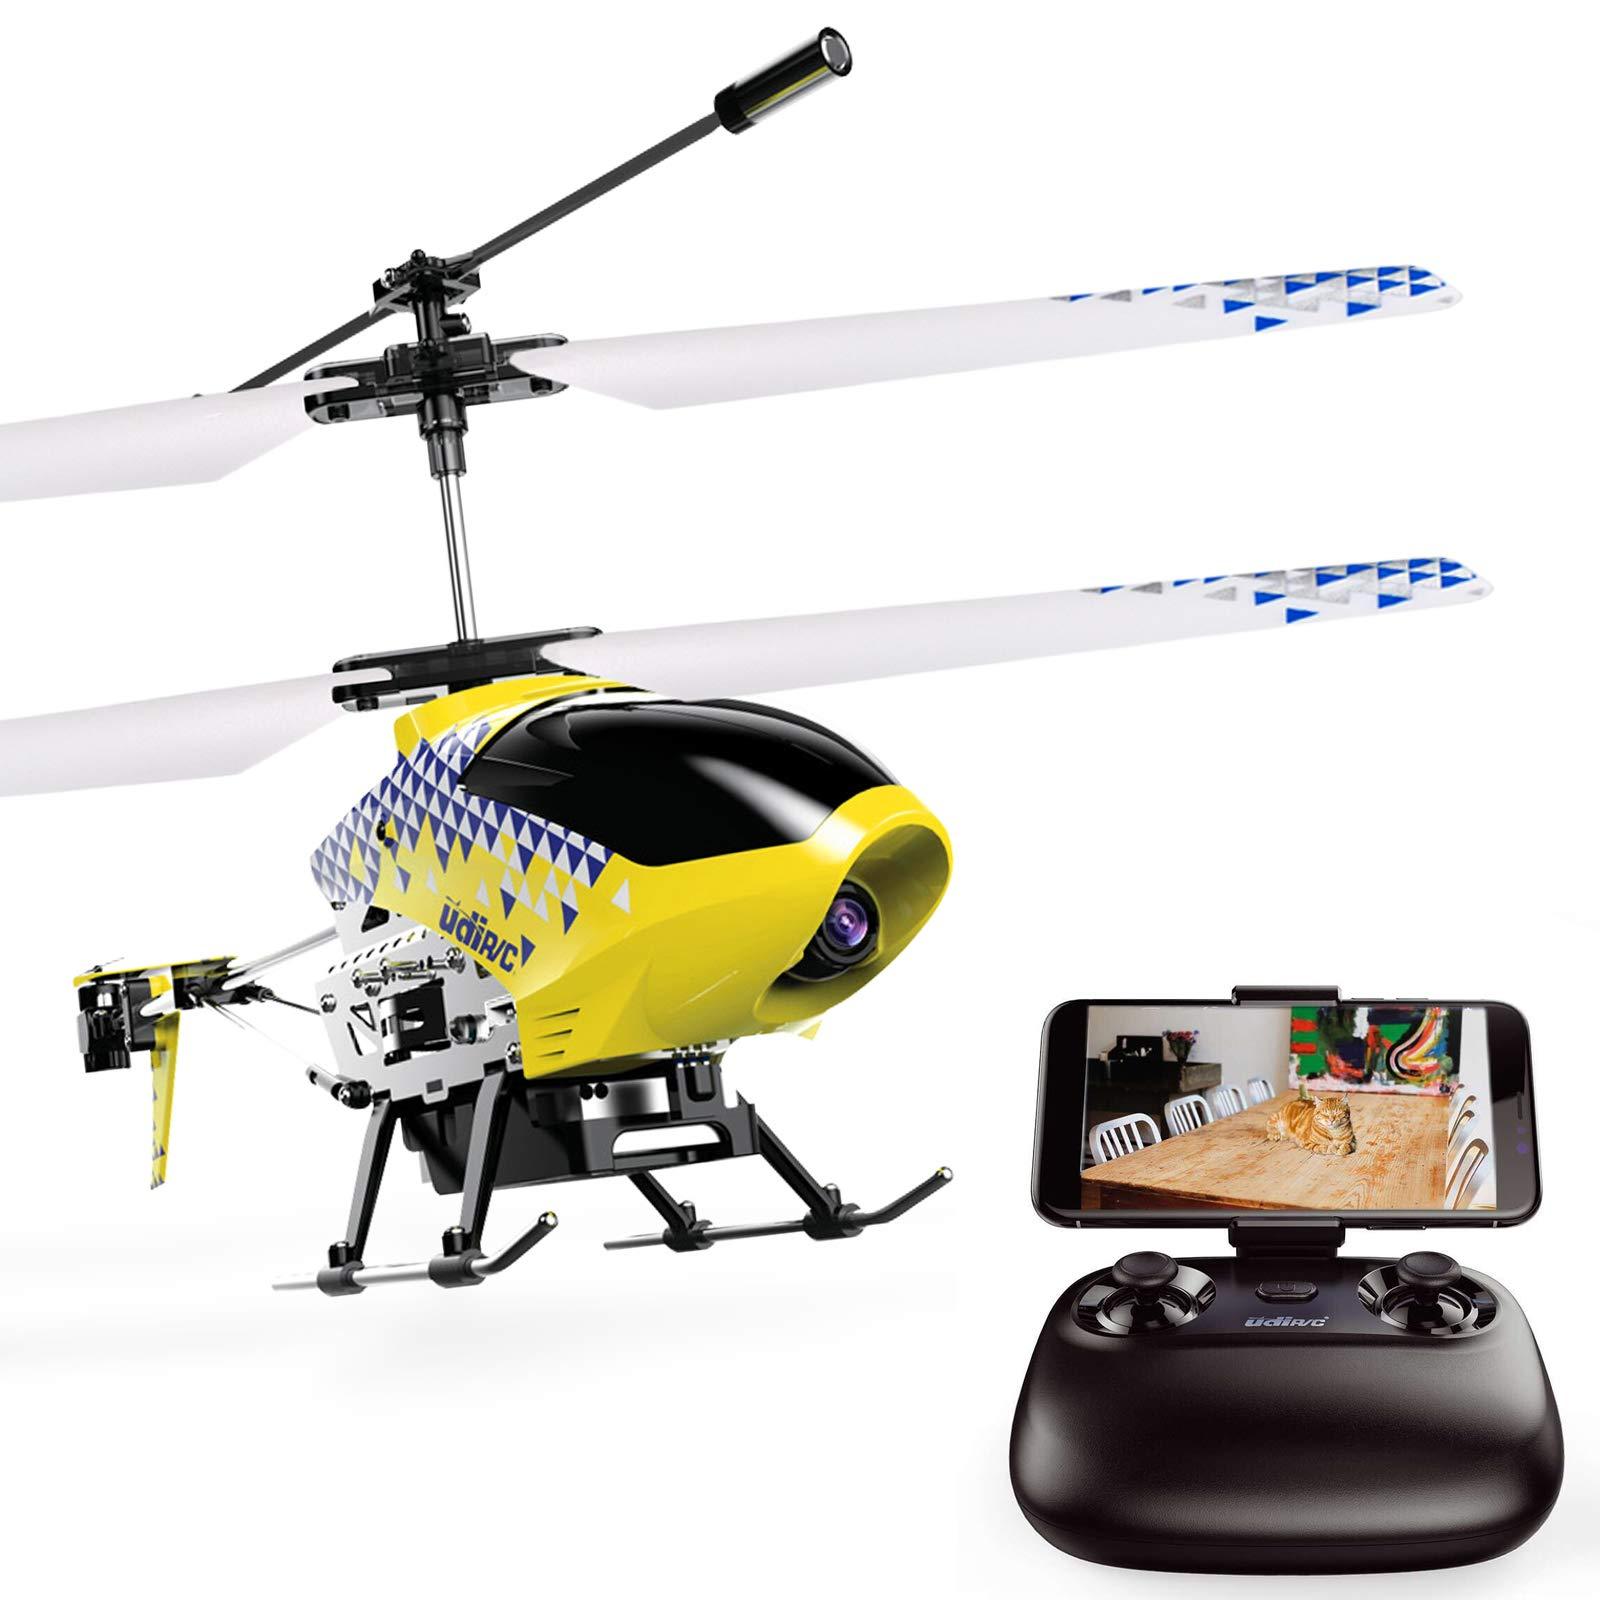 Wireless Rc Helicopter: Subheading: Advanced Features of Modern Wireless RC Helicopters